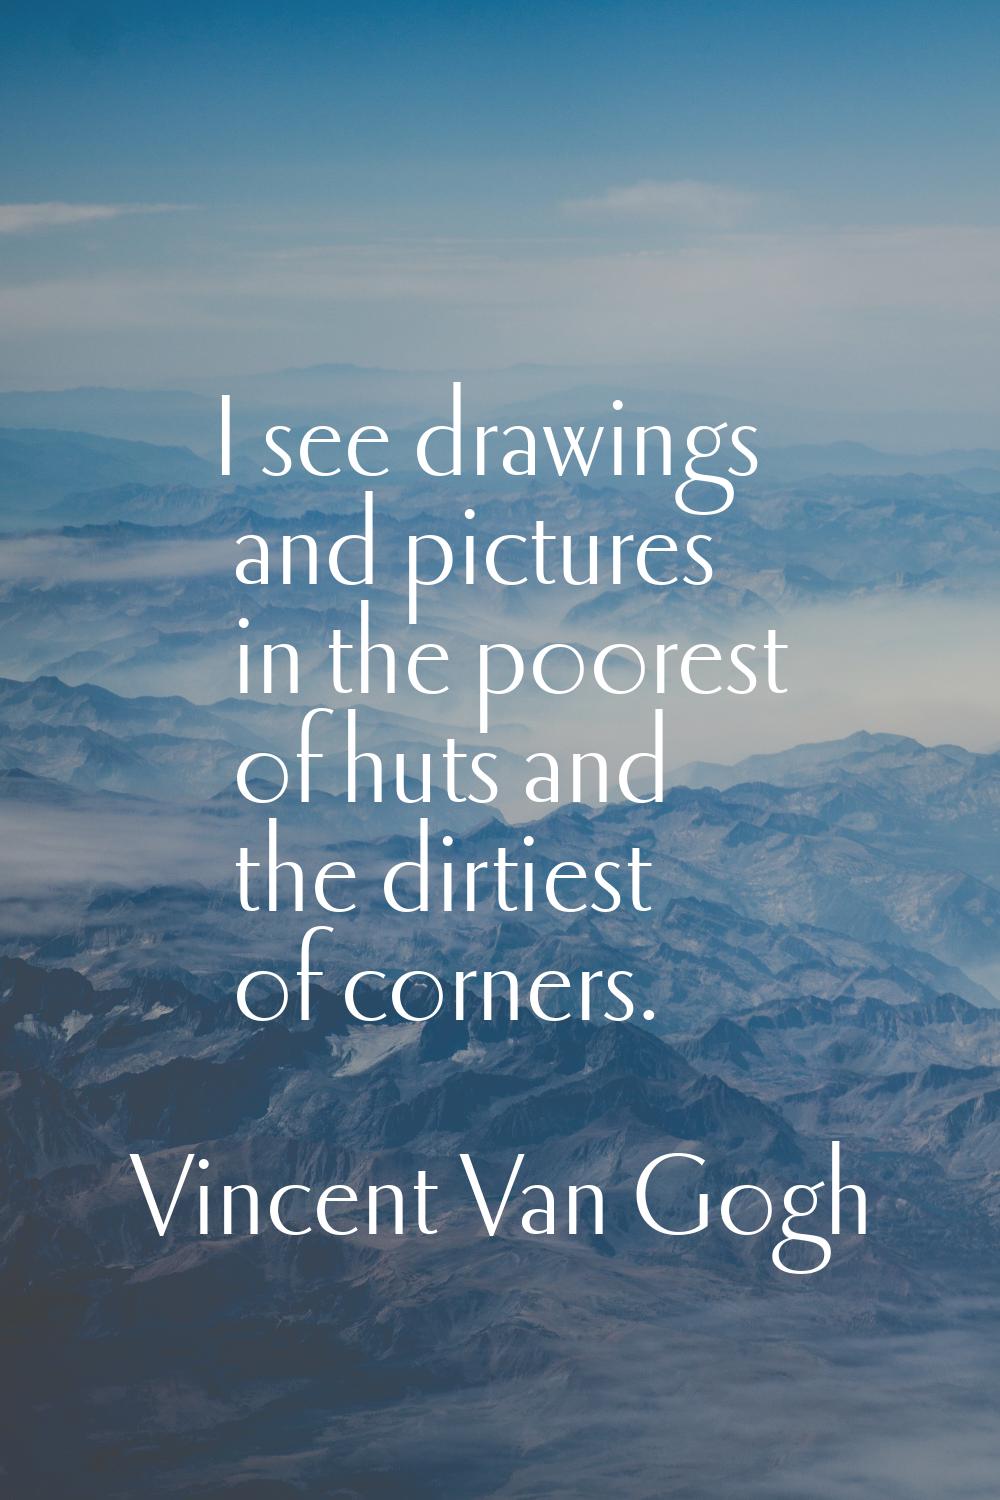 I see drawings and pictures in the poorest of huts and the dirtiest of corners.